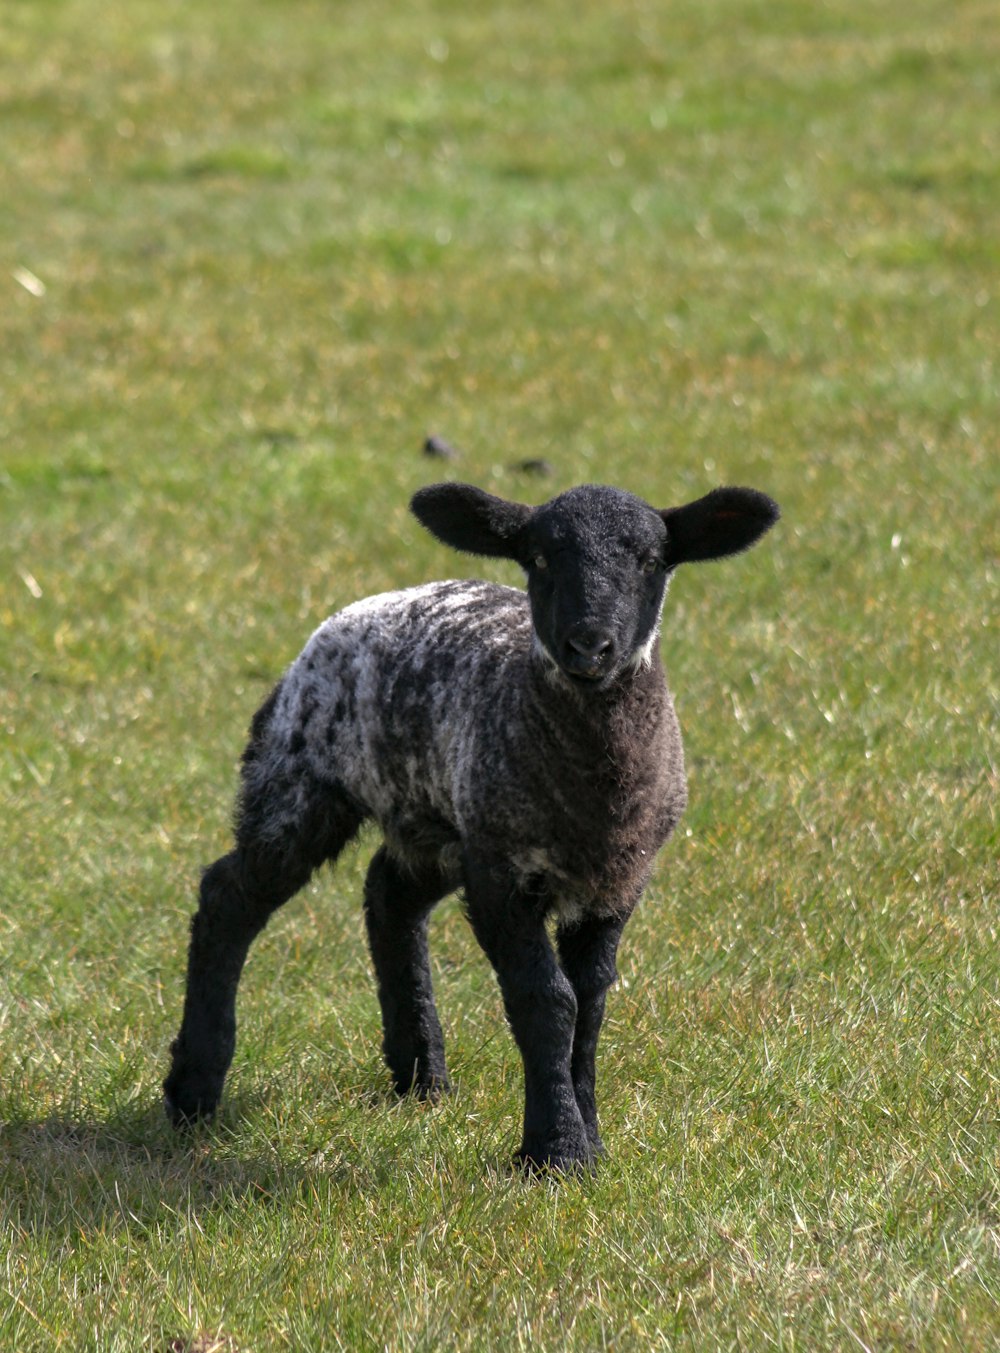 black and white sheep on green grass field during daytime